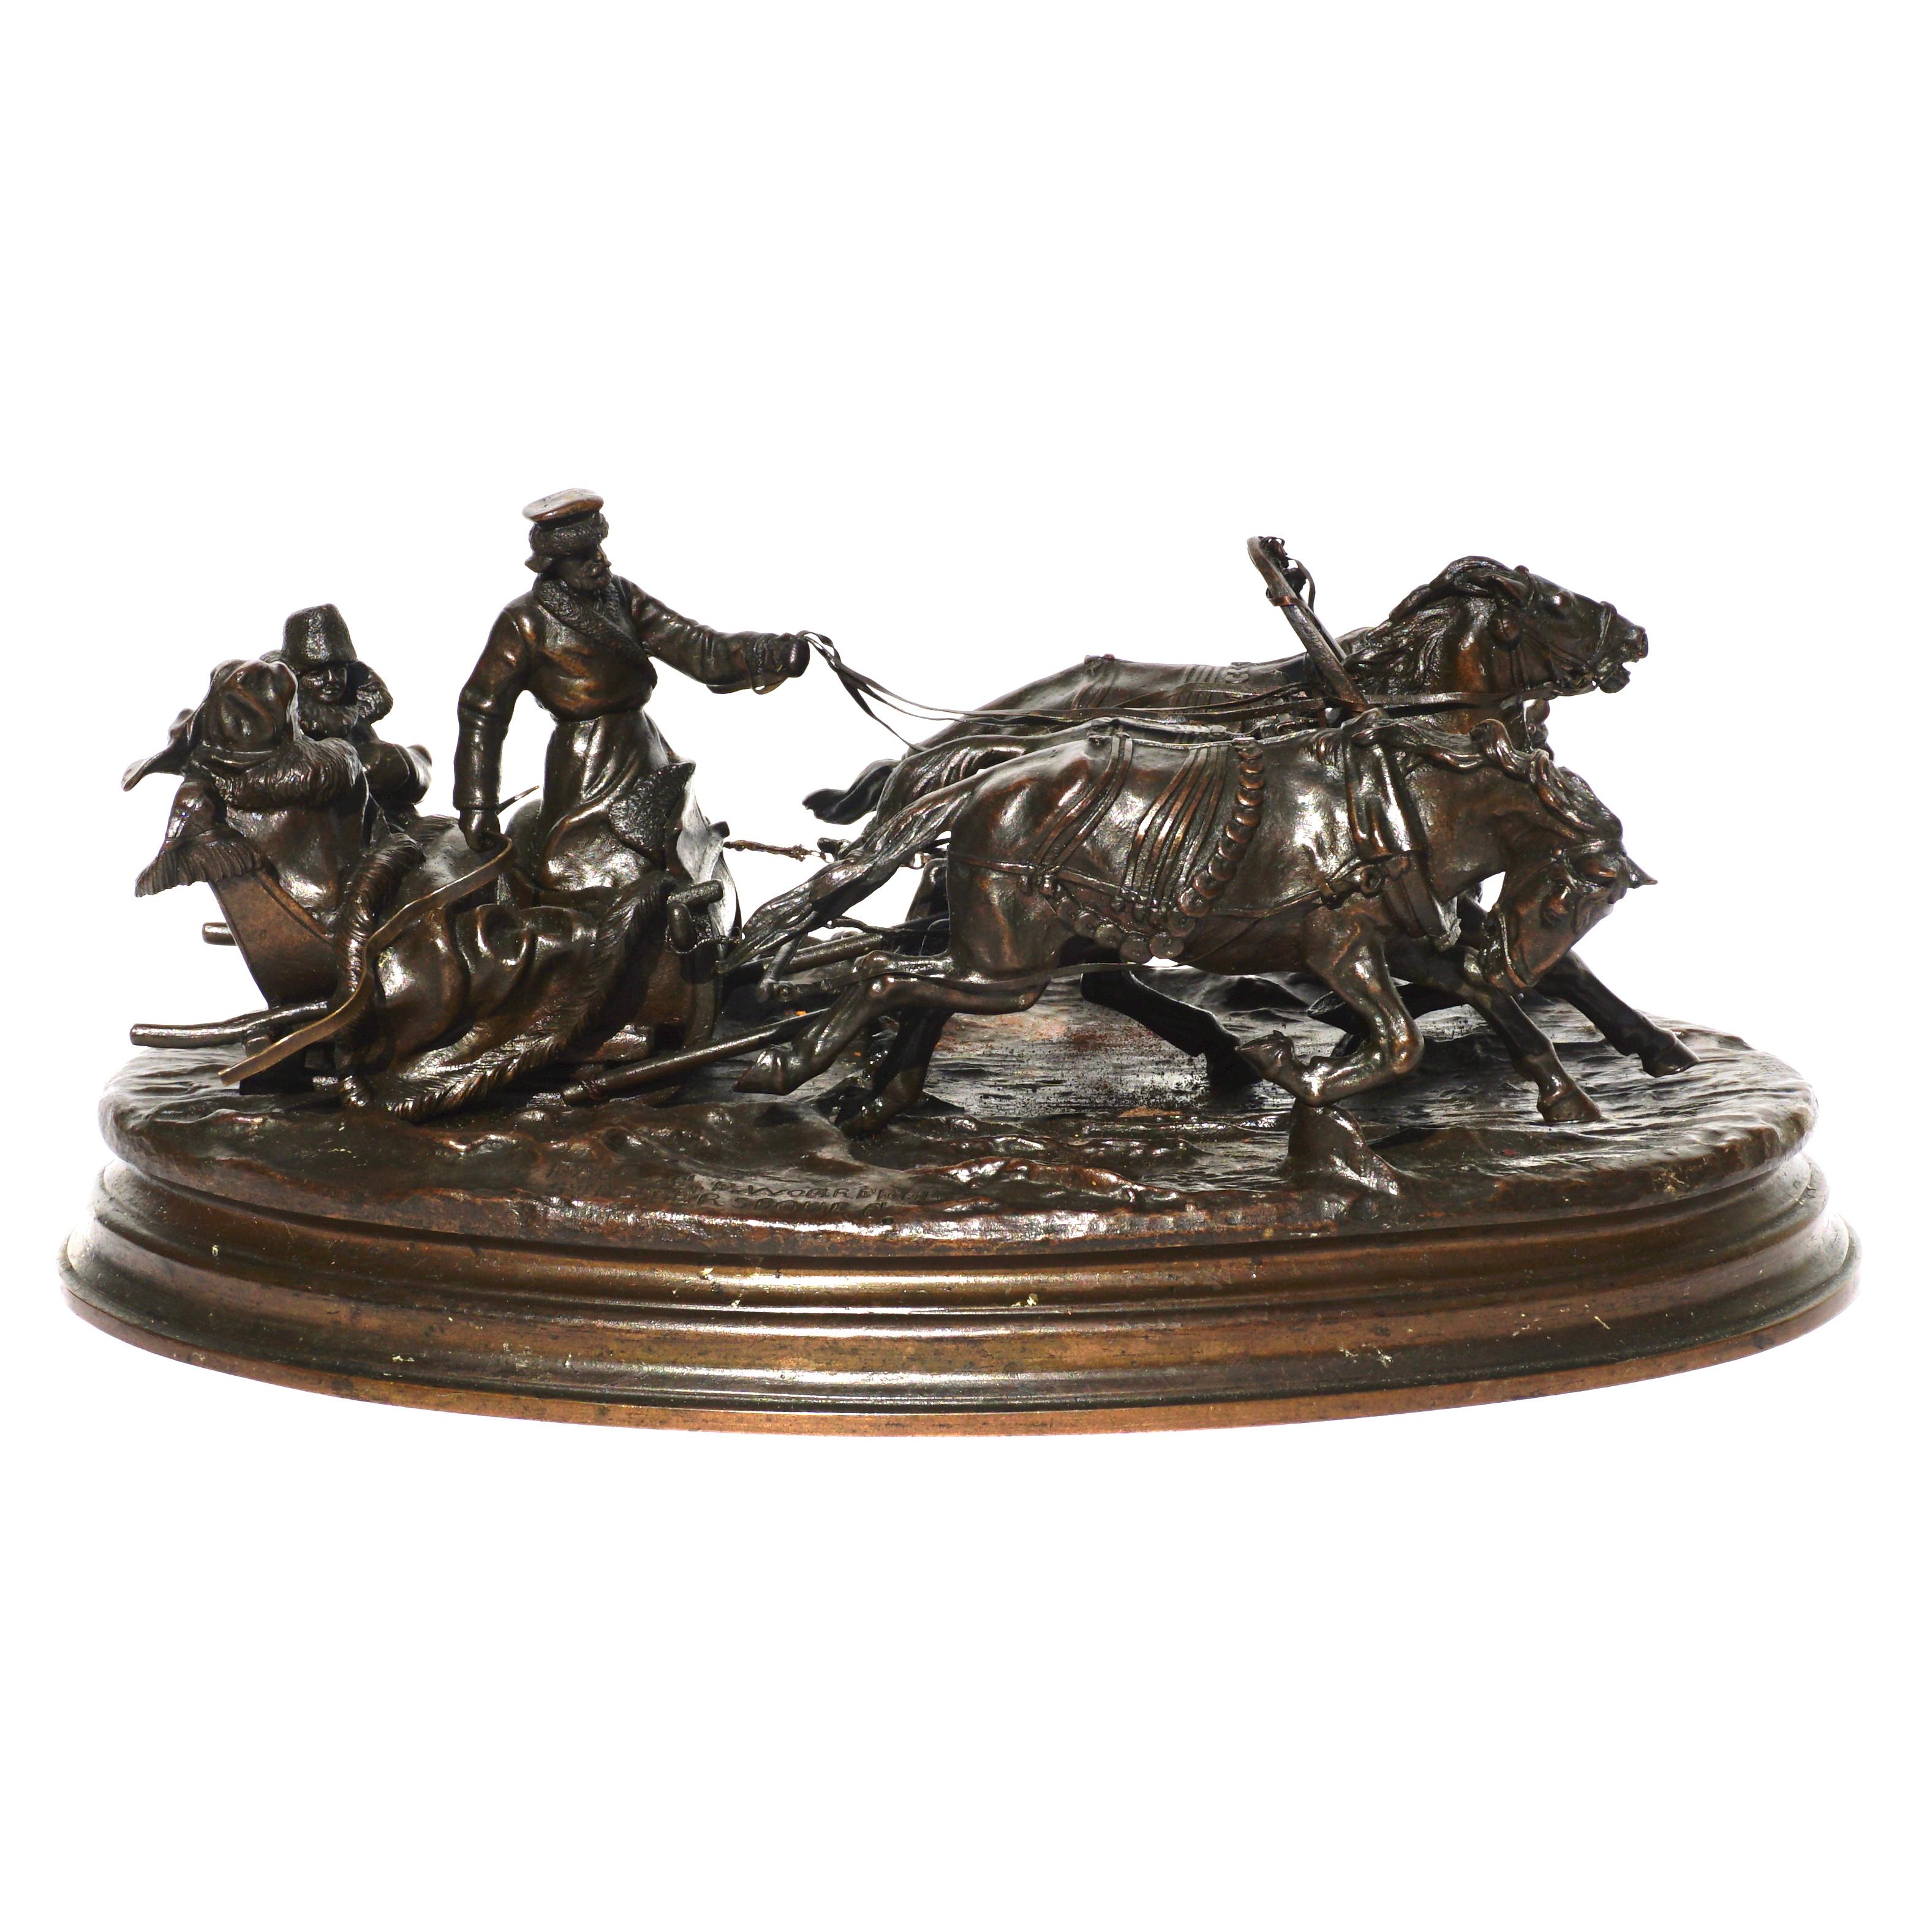 Vasili Grachev, 1831-1905. A patinated chocolate brown bronze grouping of horses pulling a troika with figures. A Classic Russian bronze grouping of three horses tearing through the snow pulling a troika led by a sleds-man leading passage for two